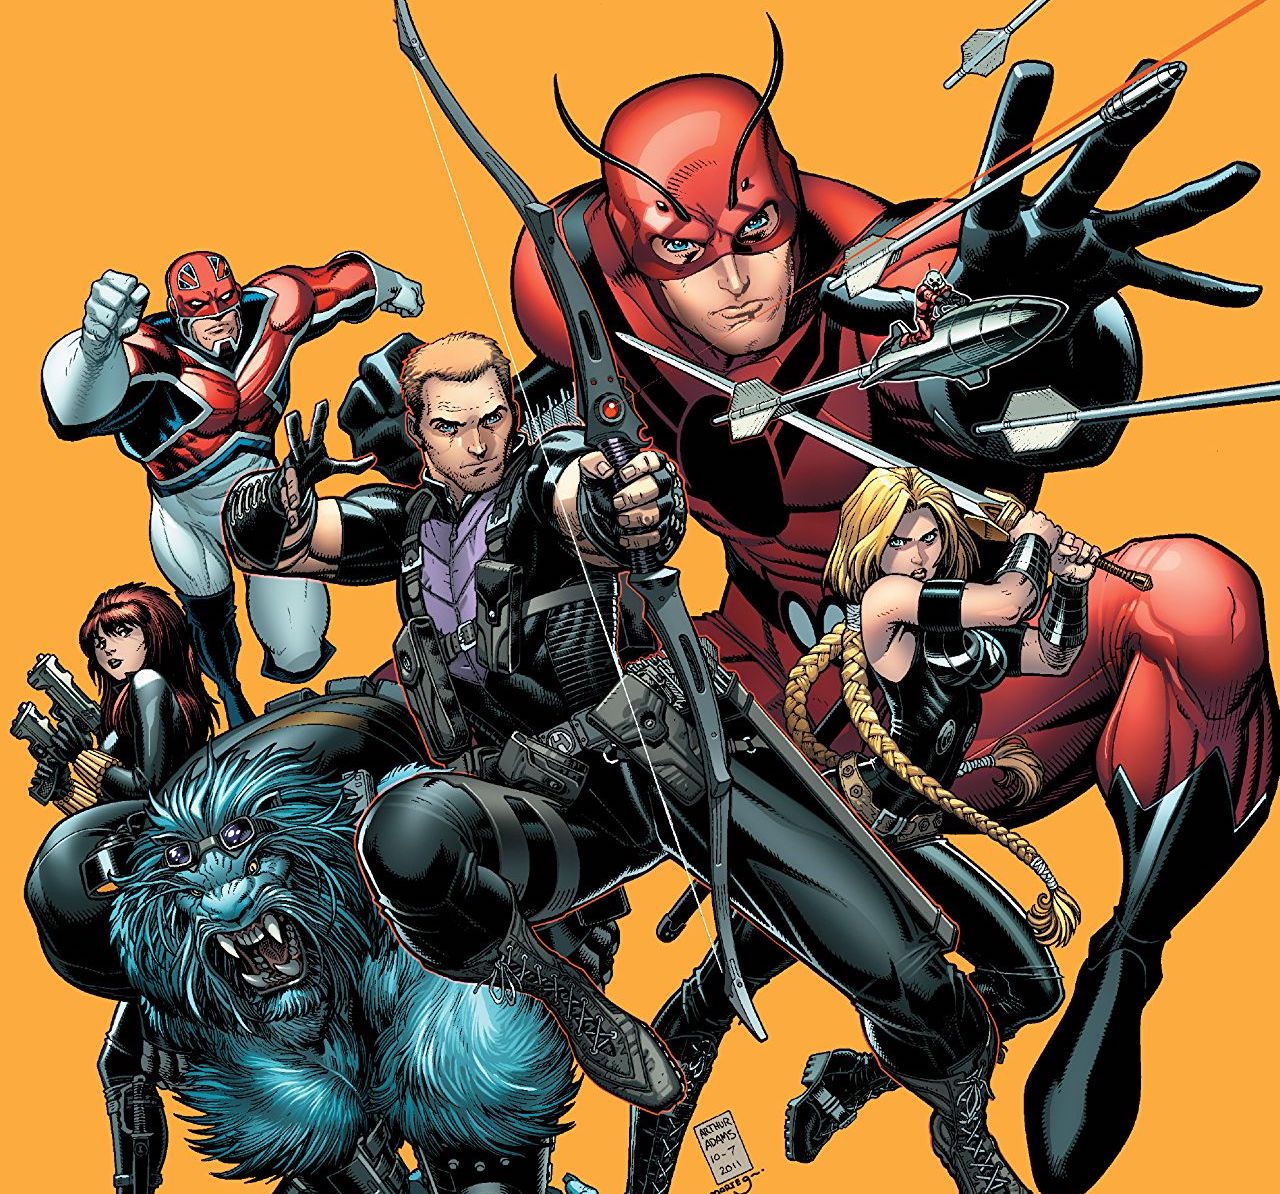 3 Takeaways: Secret Avengers by Rick Remender: The Complete Collection